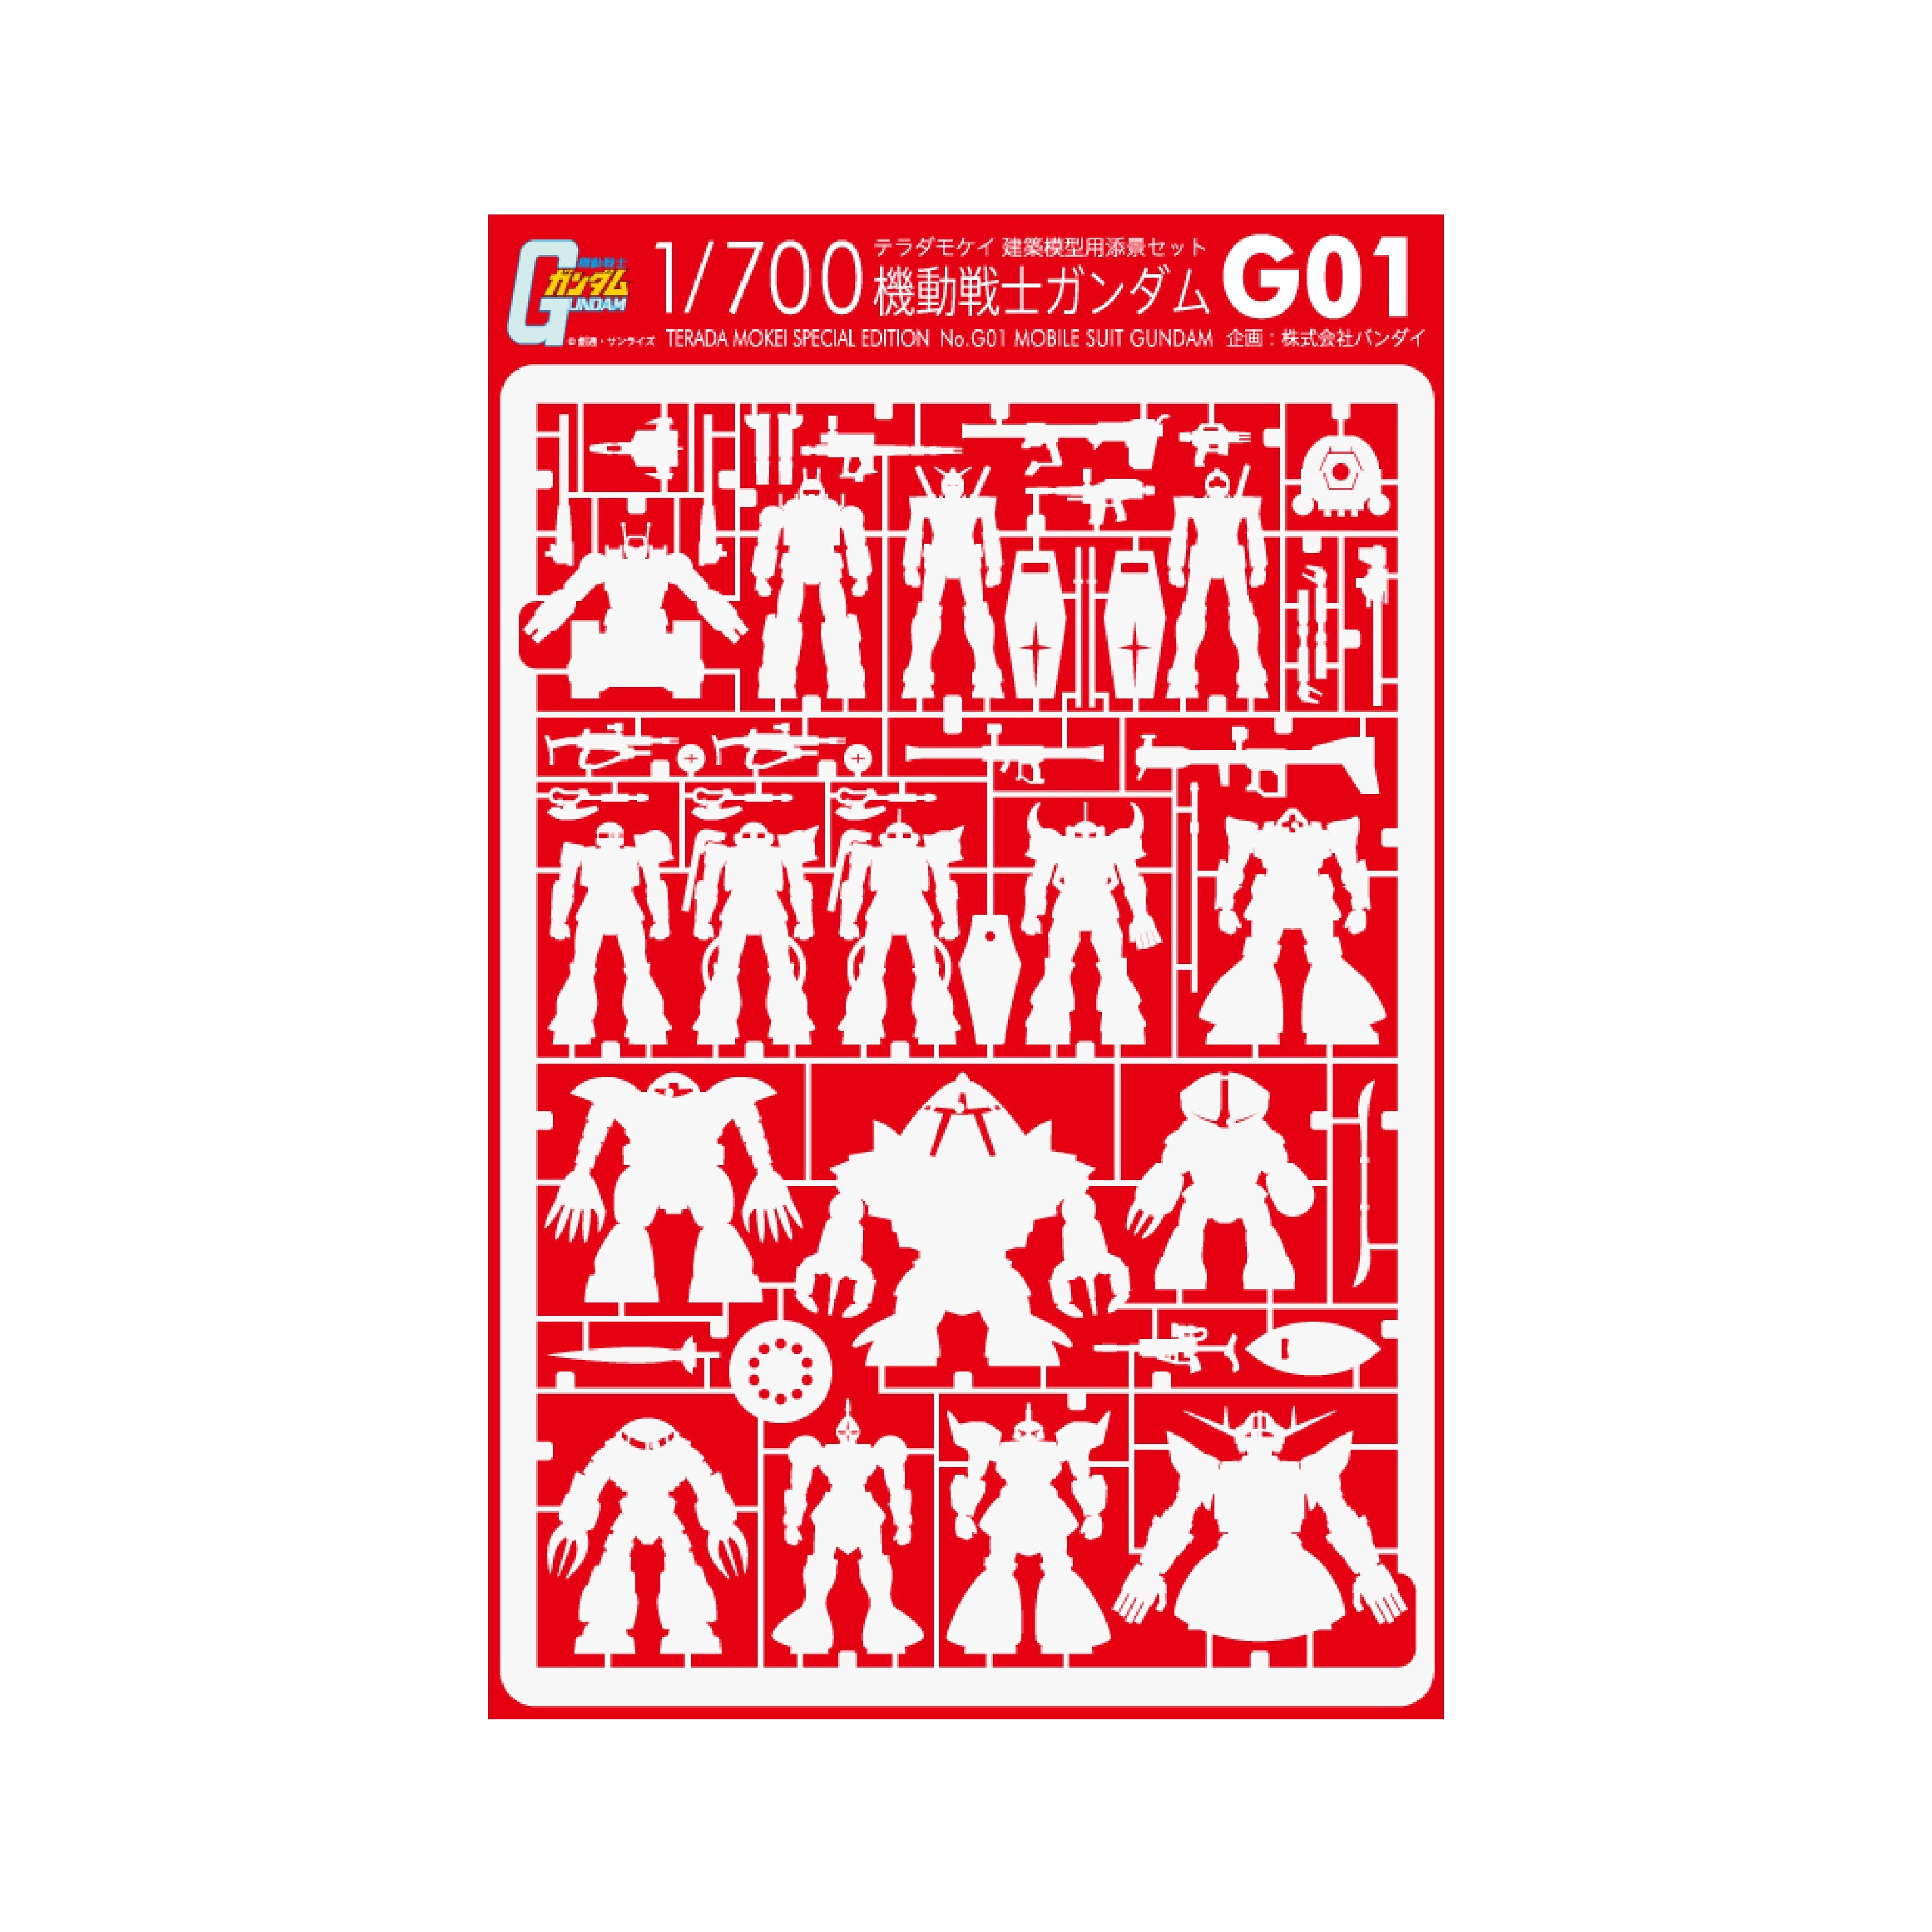 1/700 ARCHITECTURAL MODEL ACCESSORIES SERIES Special edition MOBILE SUIT GUNDAM G01